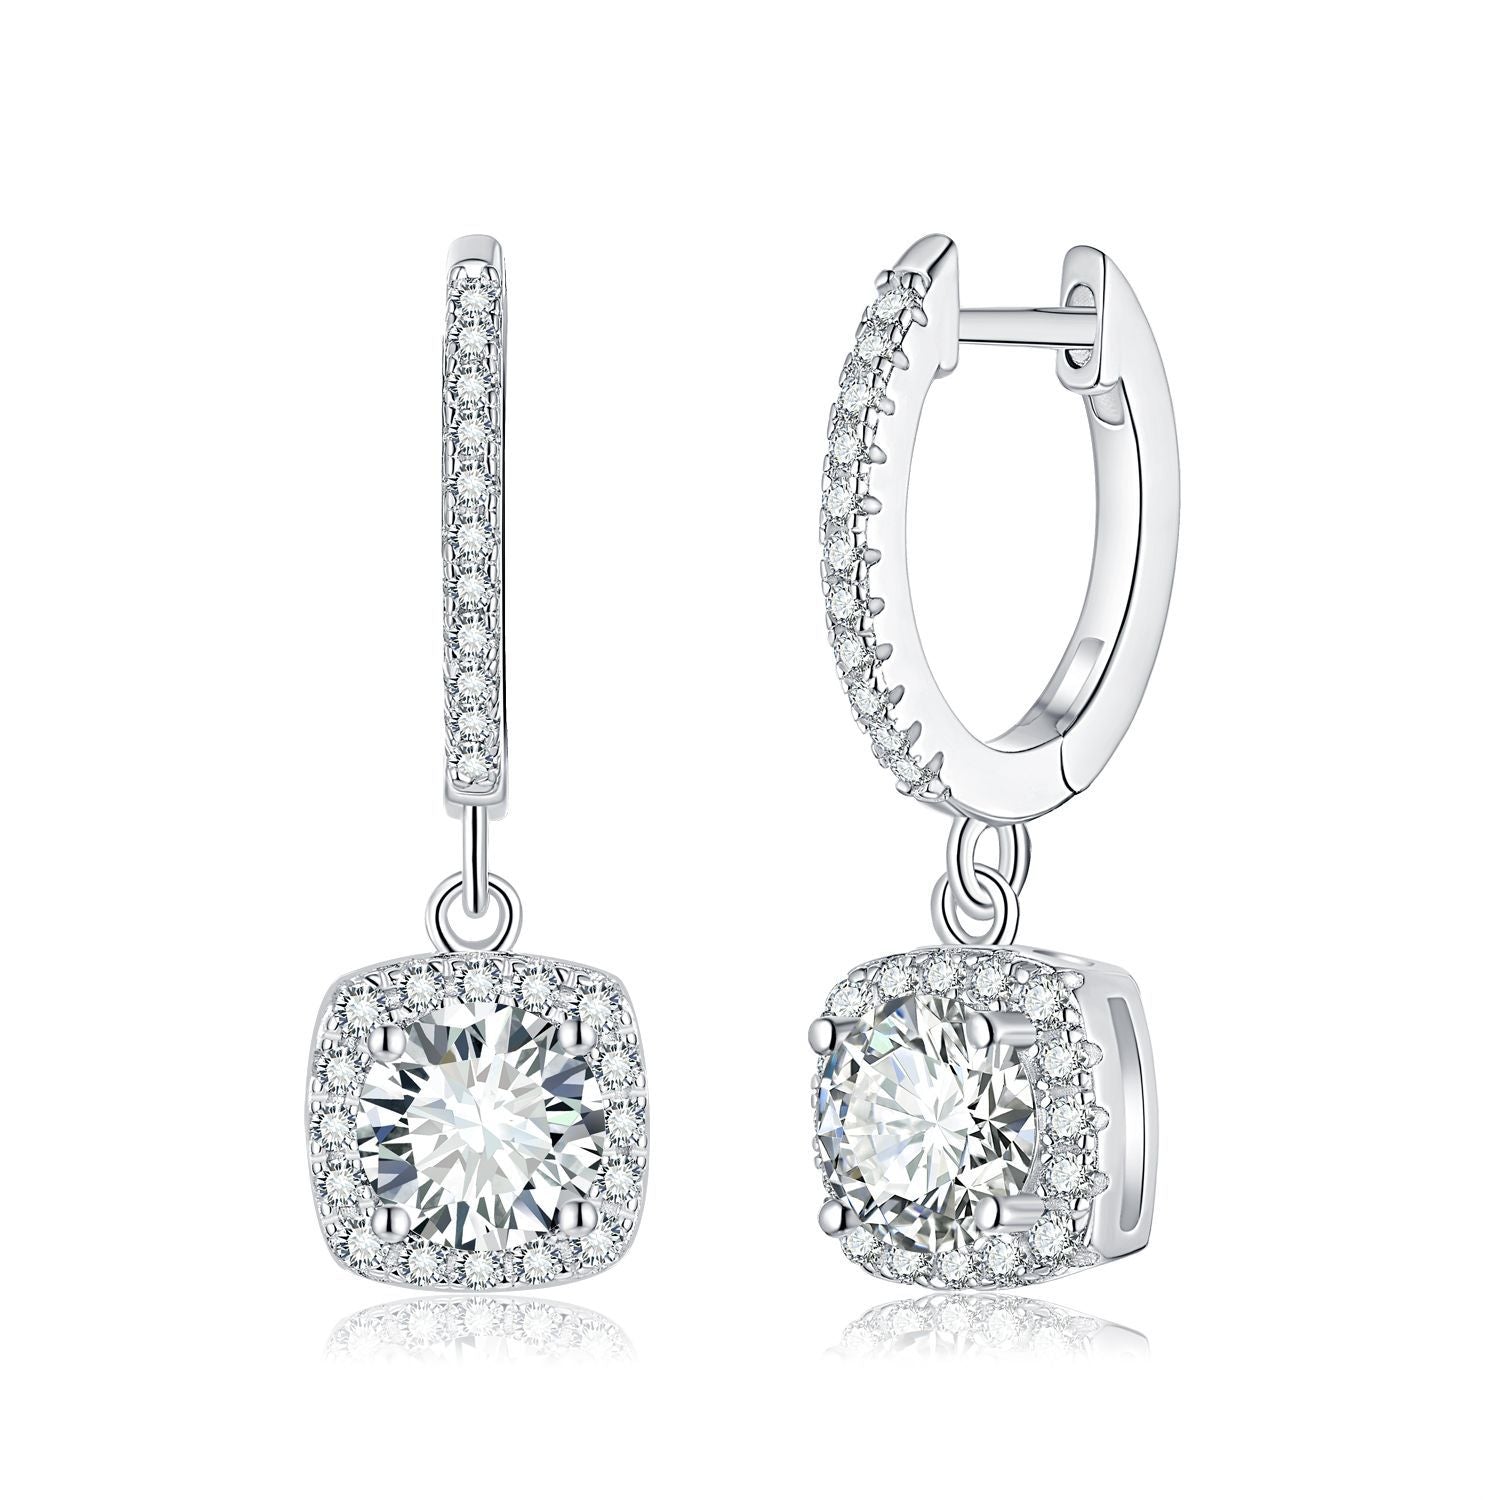 The Classic Series-1ct Moissanite Dangling Earrings